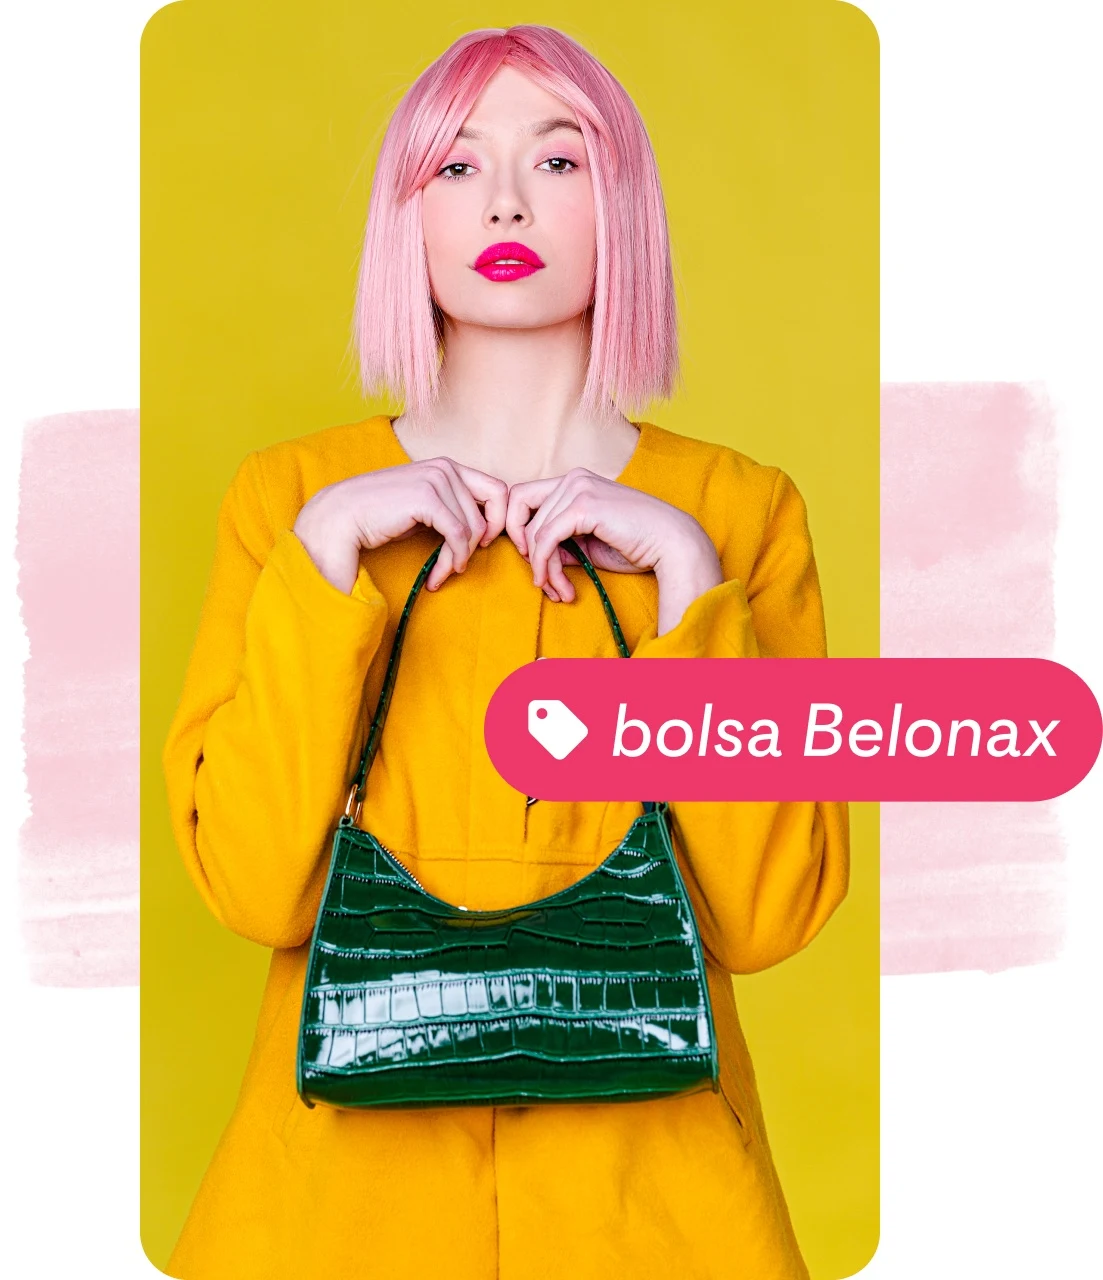 Pin collage of a woman with pink hair and yellow coat holding a green handbag, with a pink product tag.